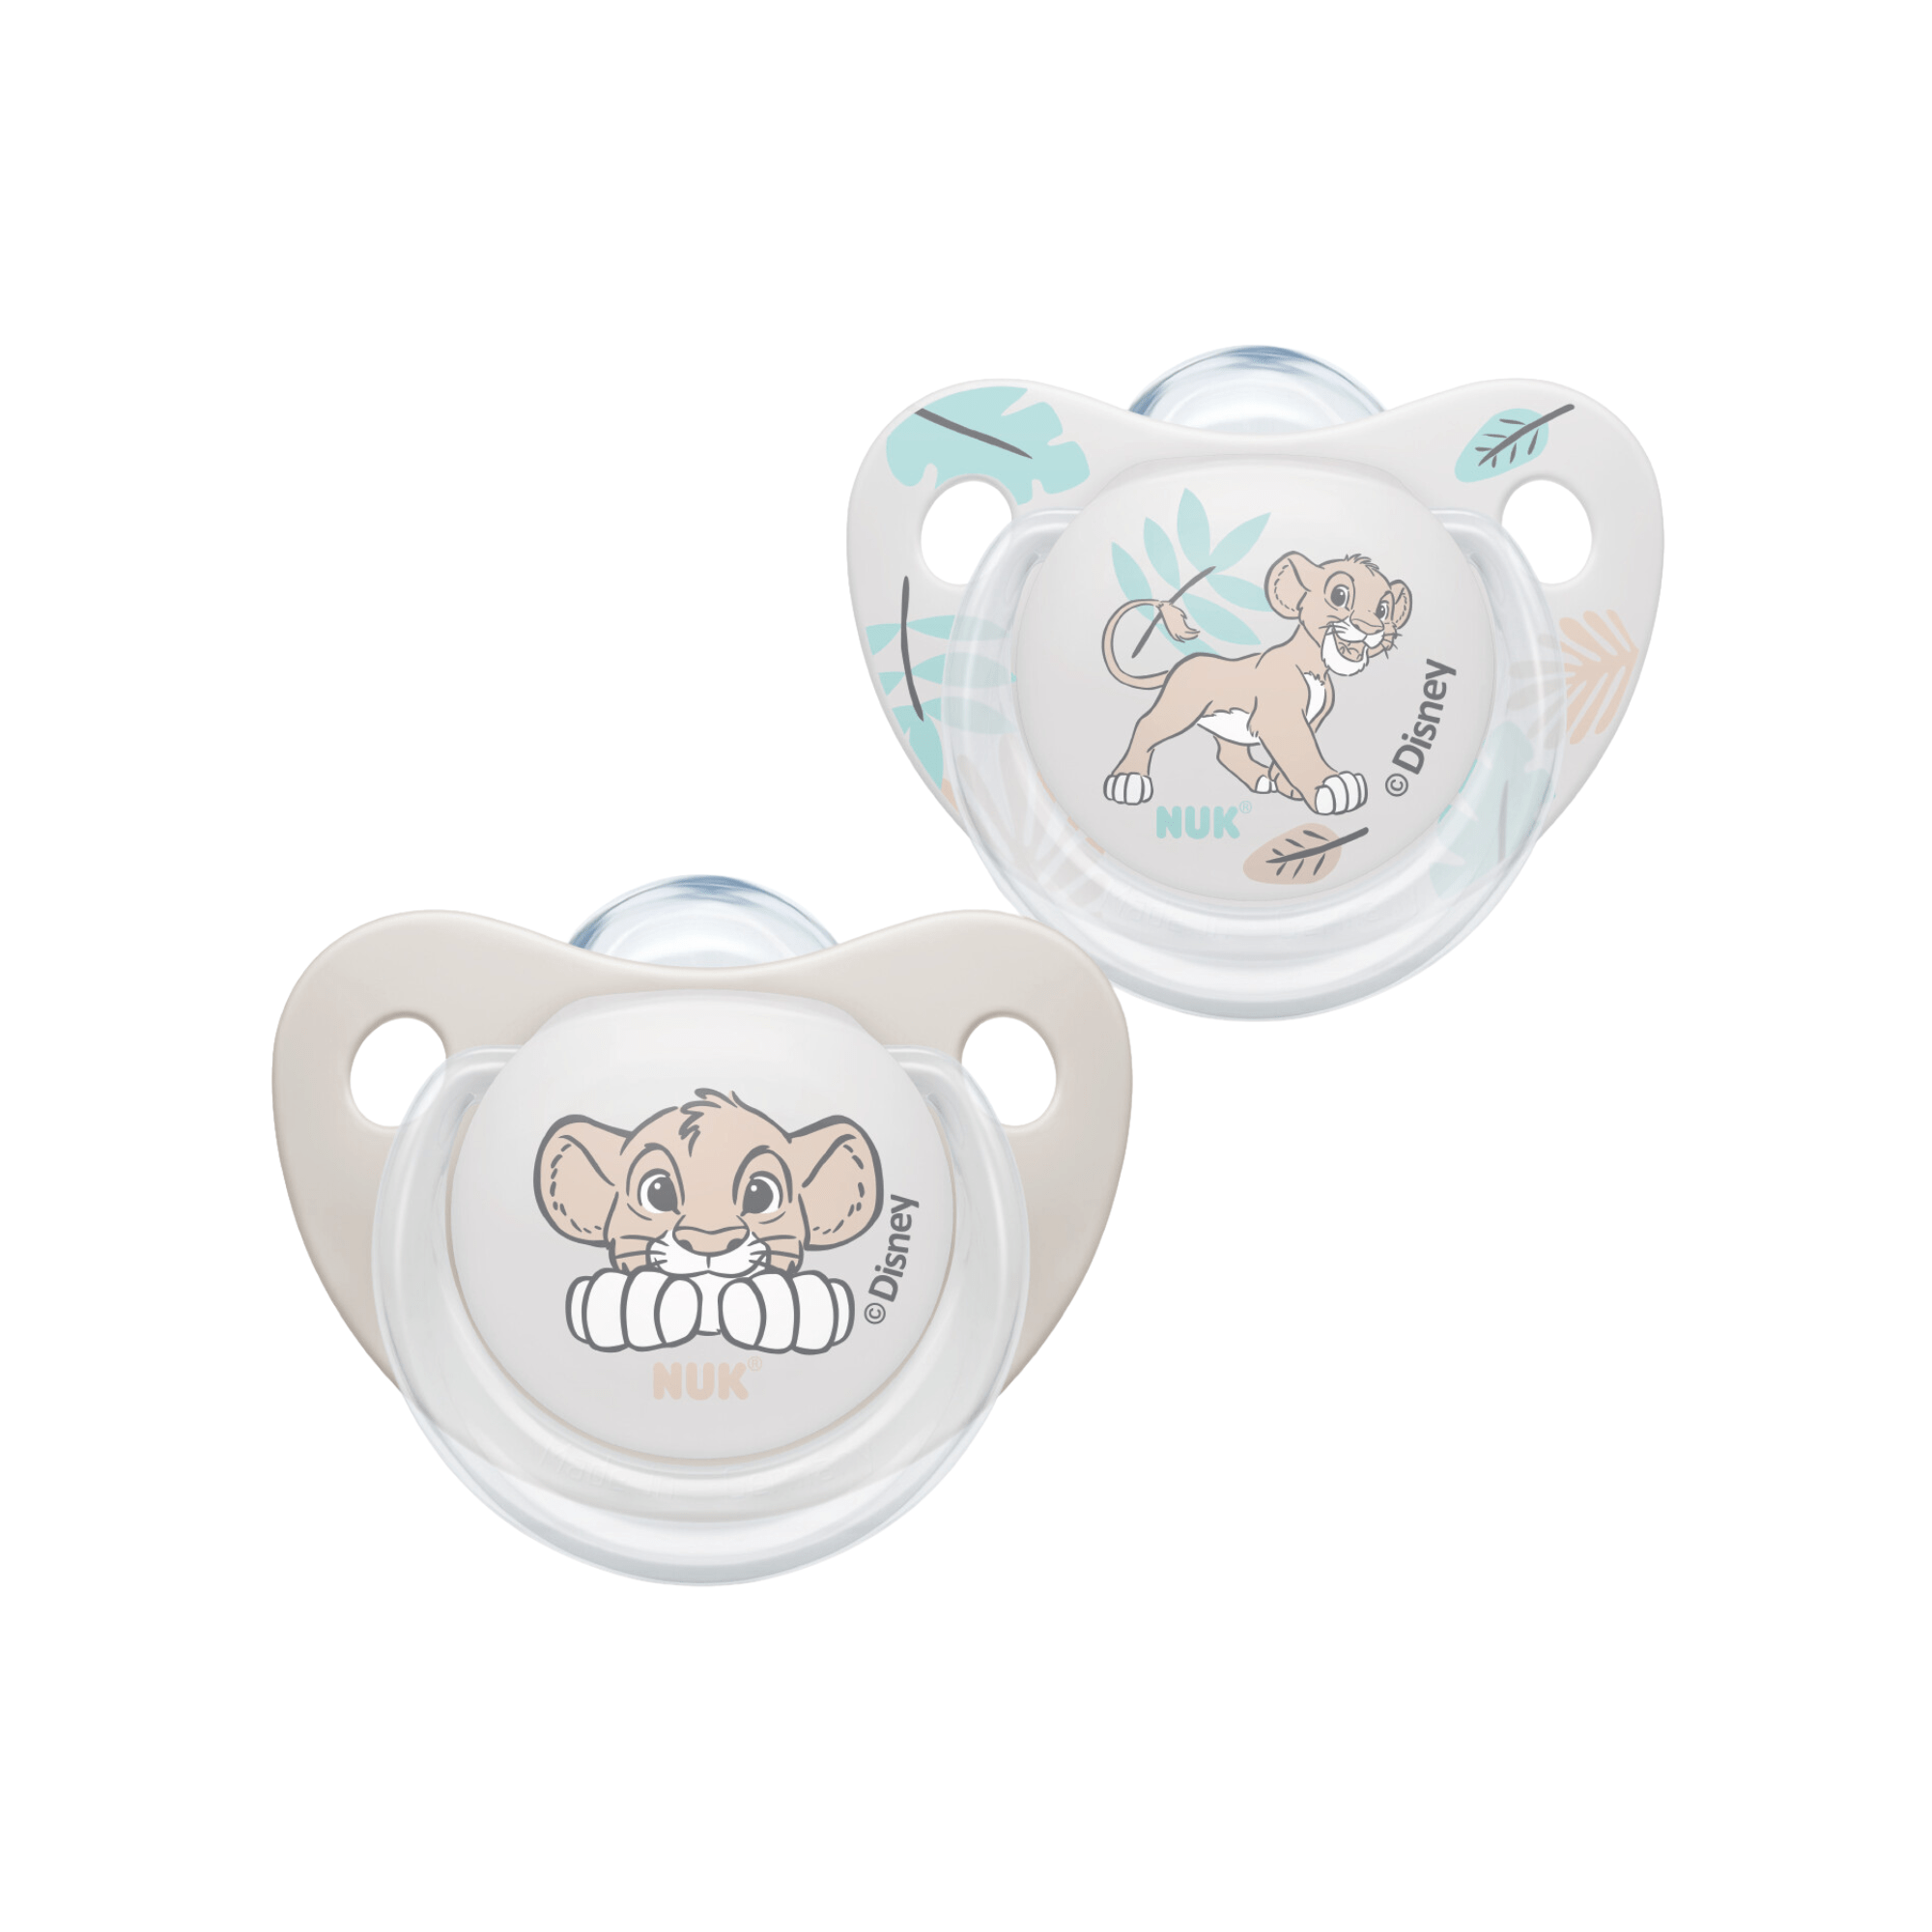 NUK Lion King Soother 0-6 Months - 2 Pack